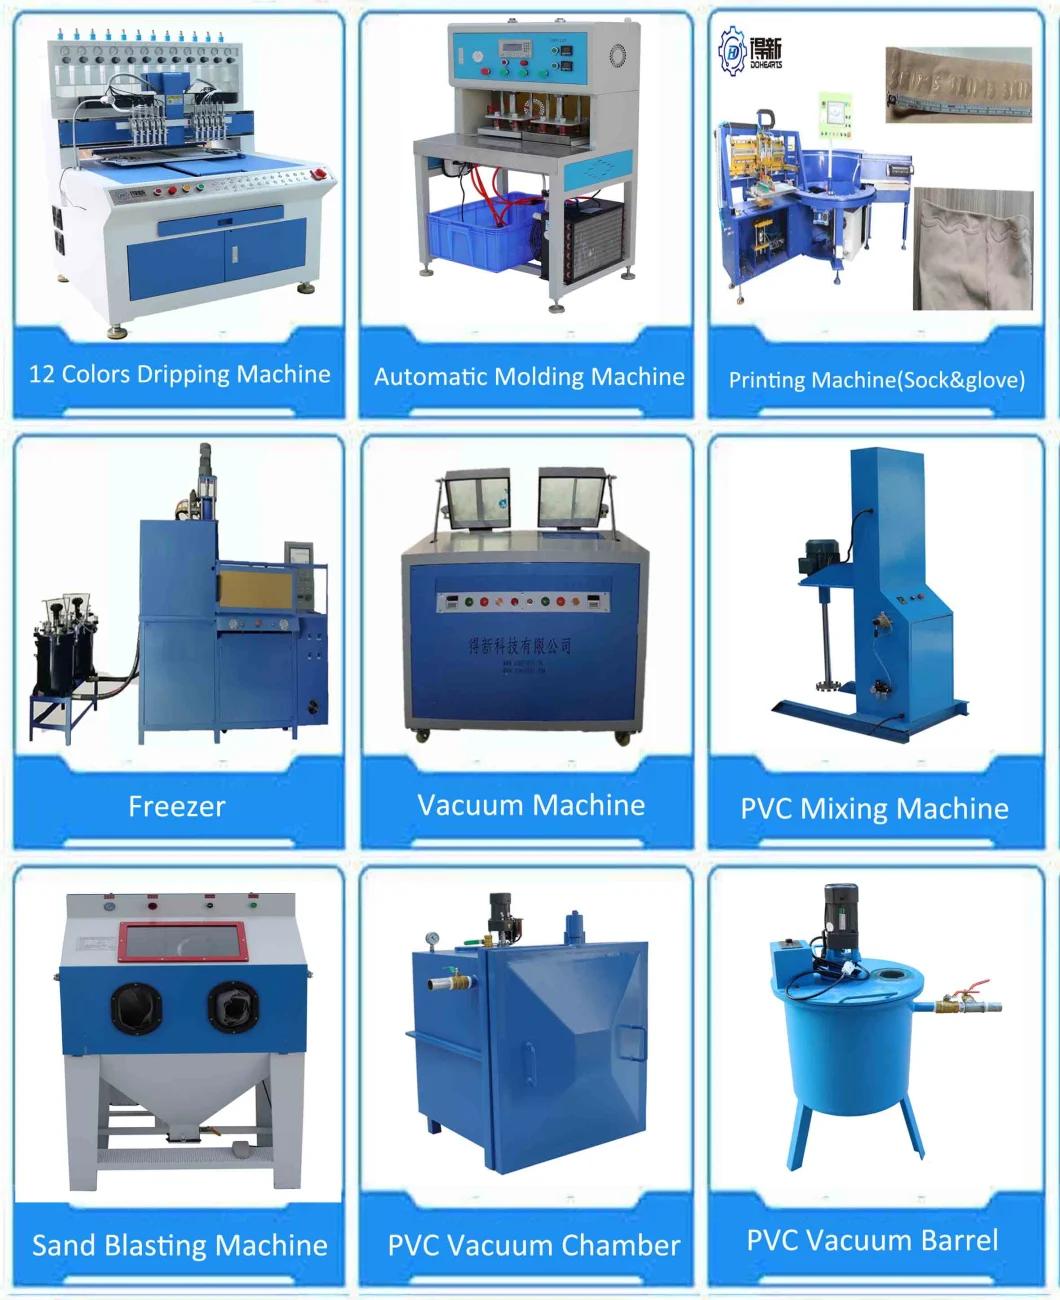 High Safety Level Metal CNC Machine for Aluminium Shoe Mould Mold Making